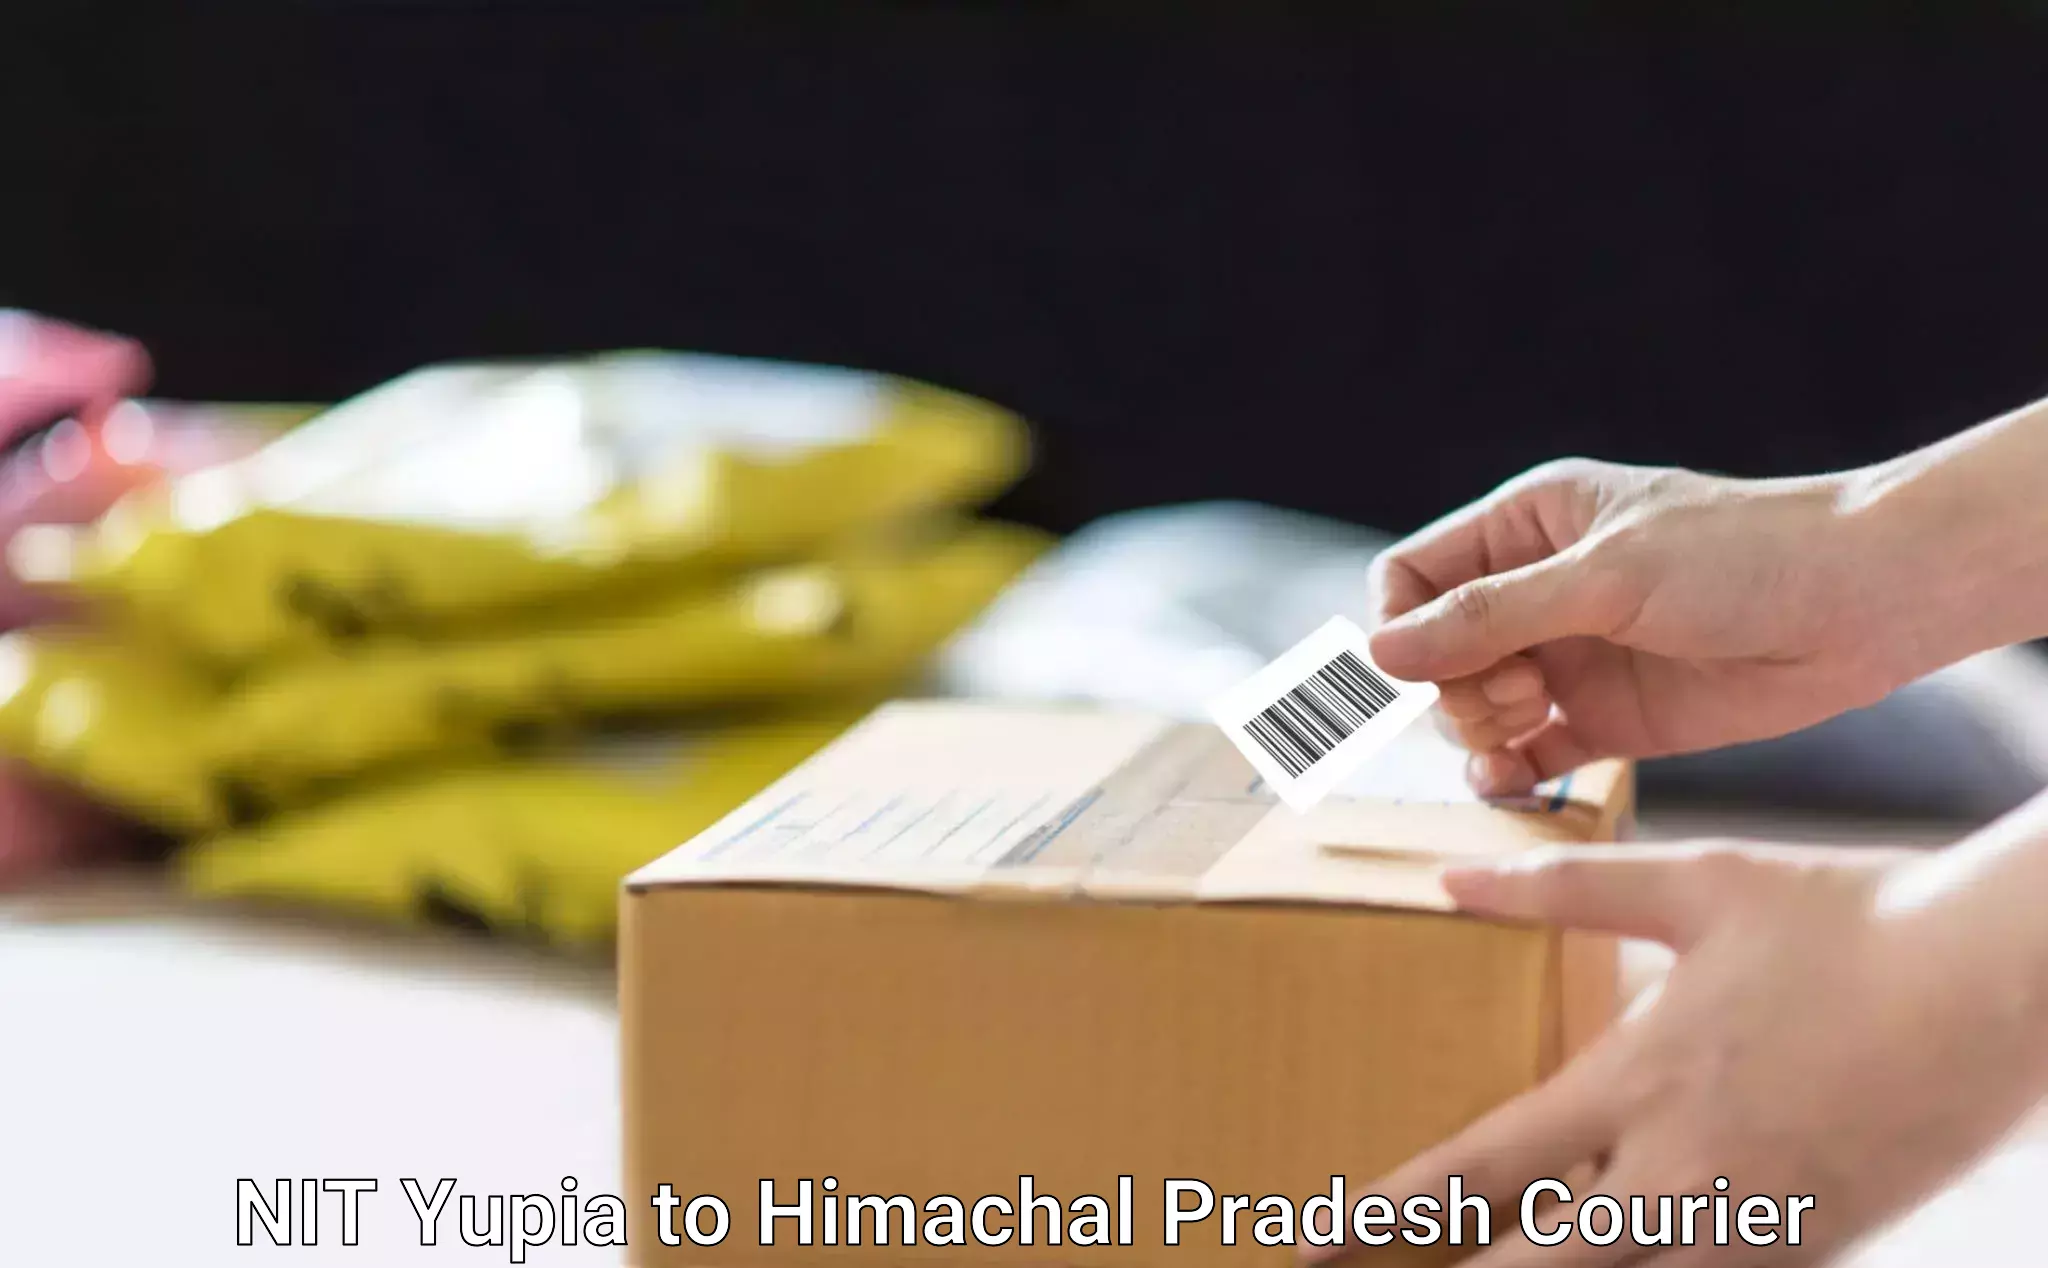 Express mail service NIT Yupia to Hamirpur Himachal